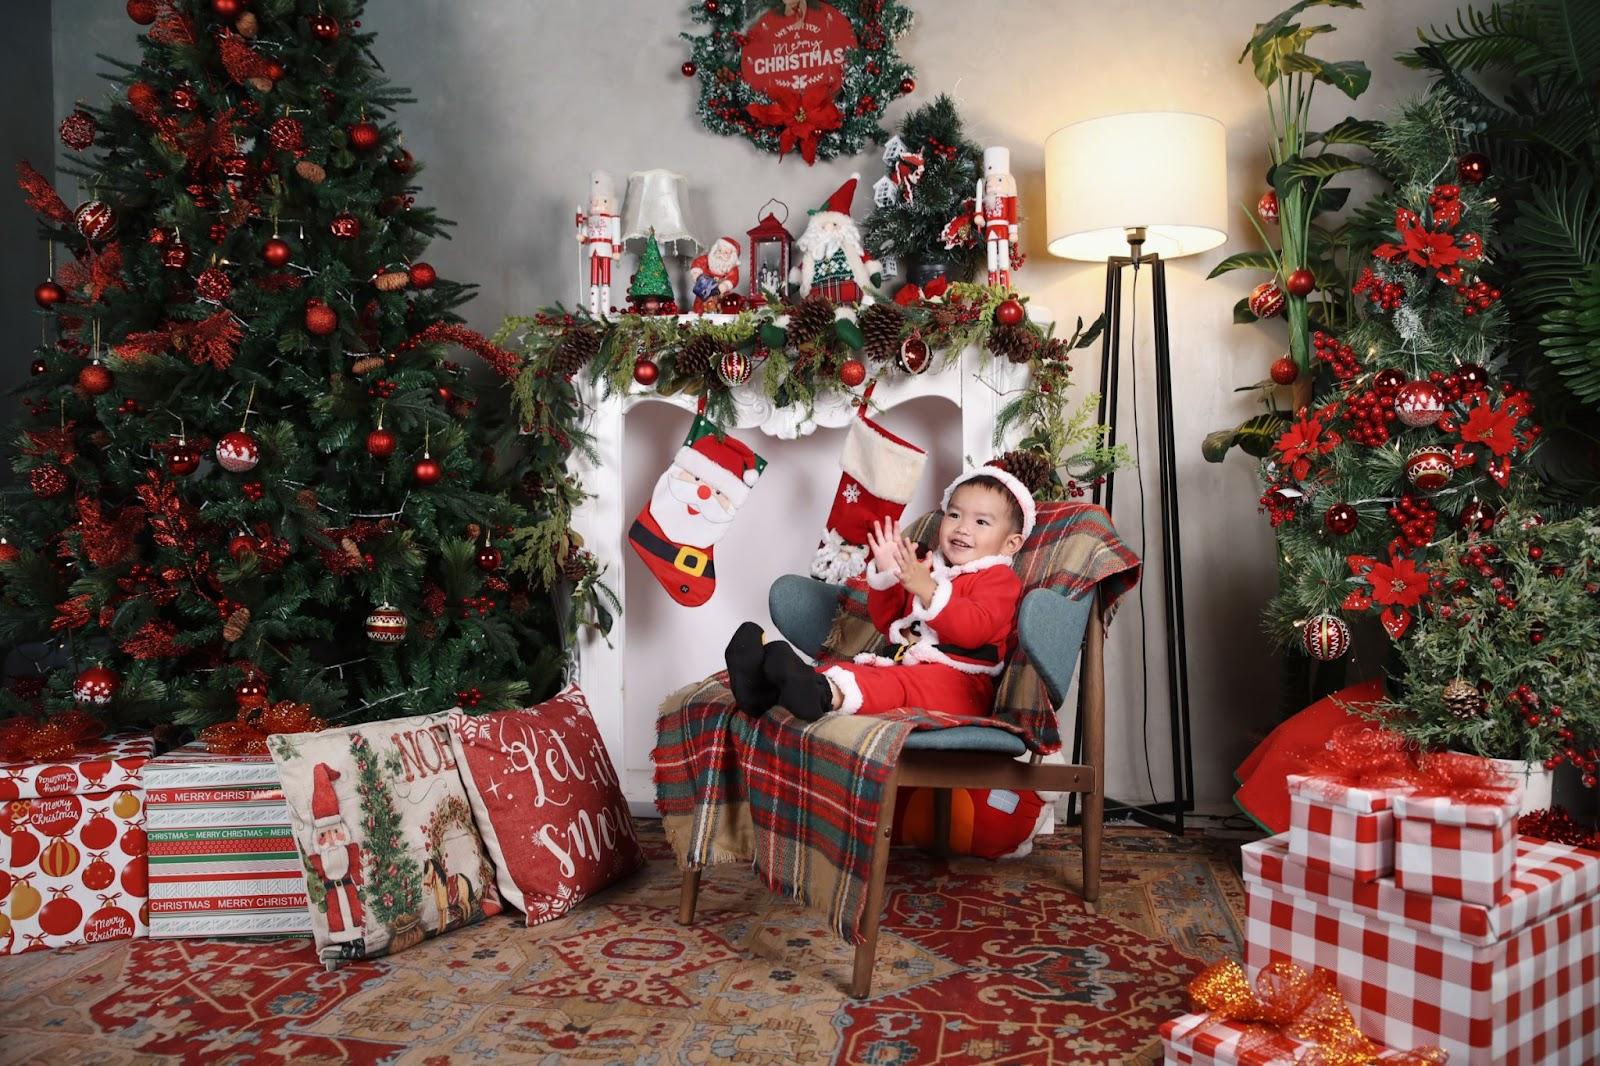 newborn christmas photo idea: baby seated by the fireplace wearing a Santa costume